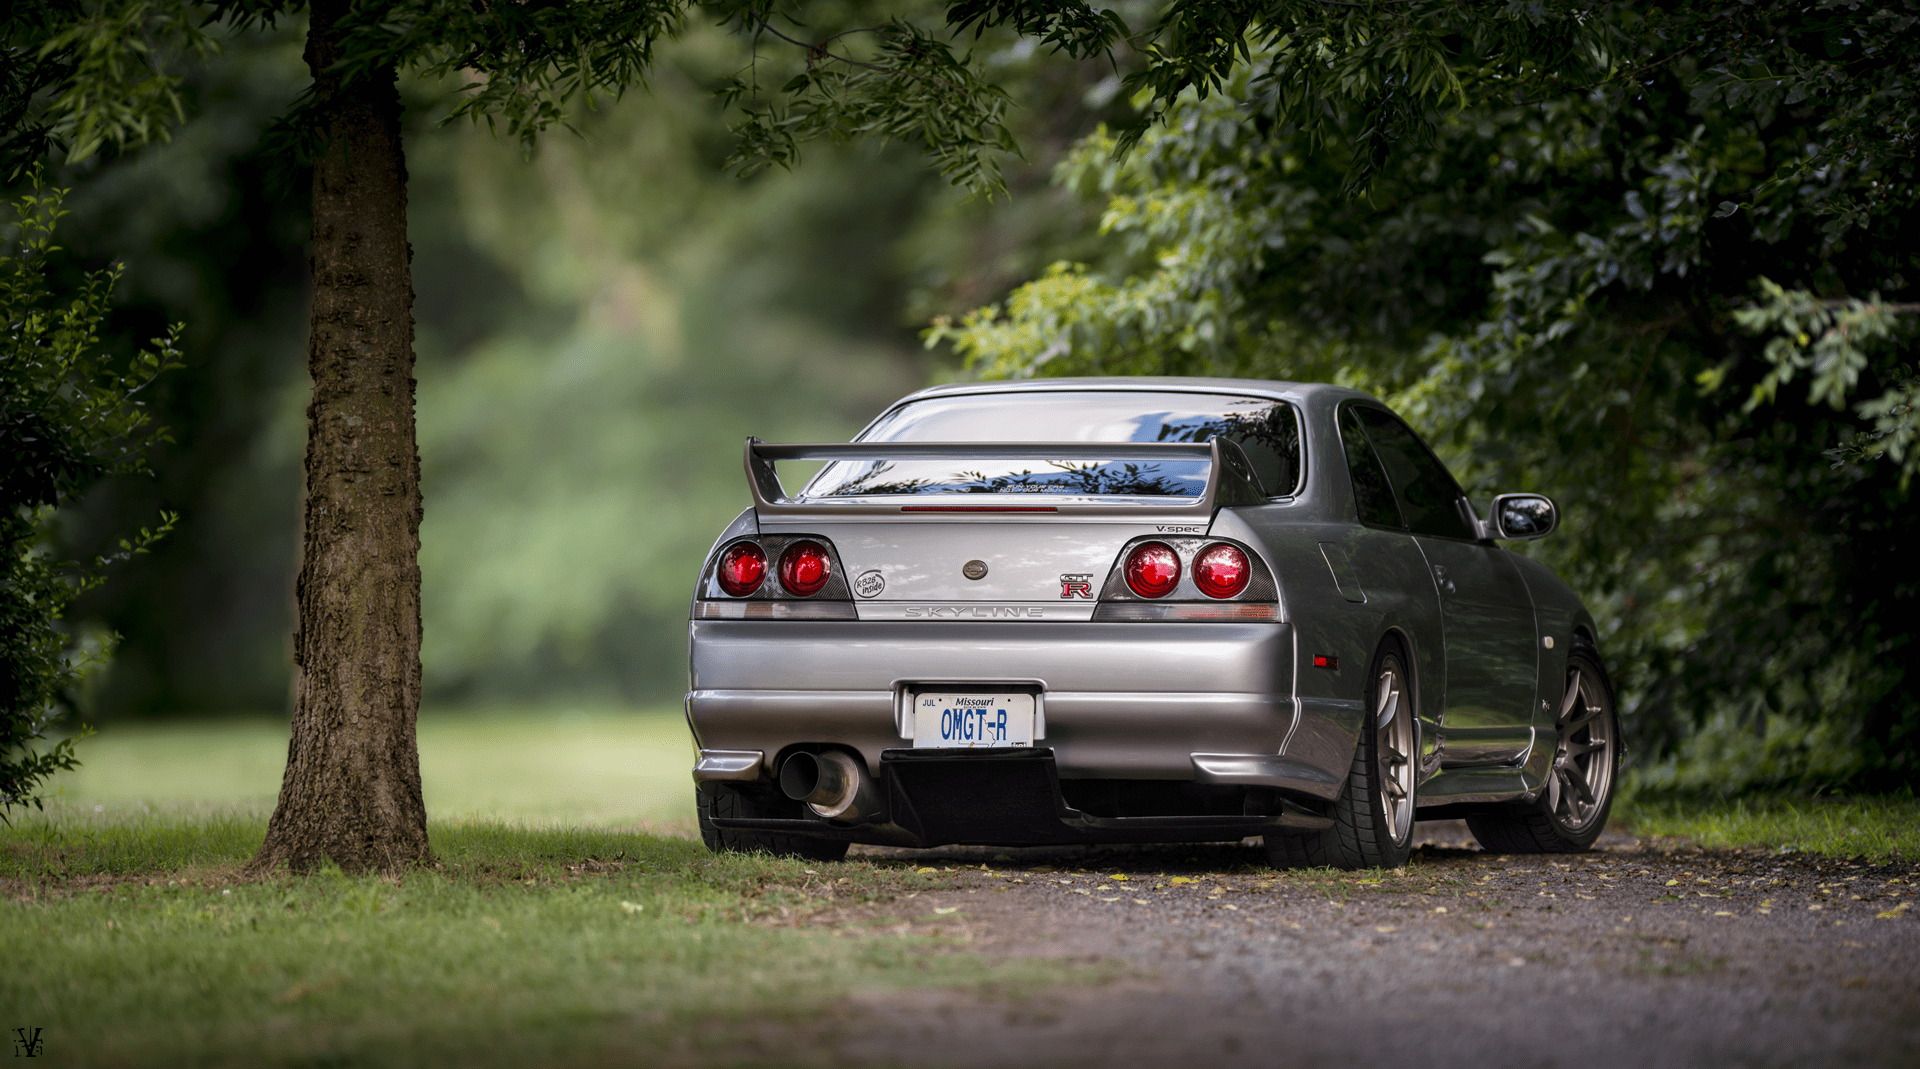 R33 Wallpapers Top Free R33 Backgrounds Wallpaperaccess